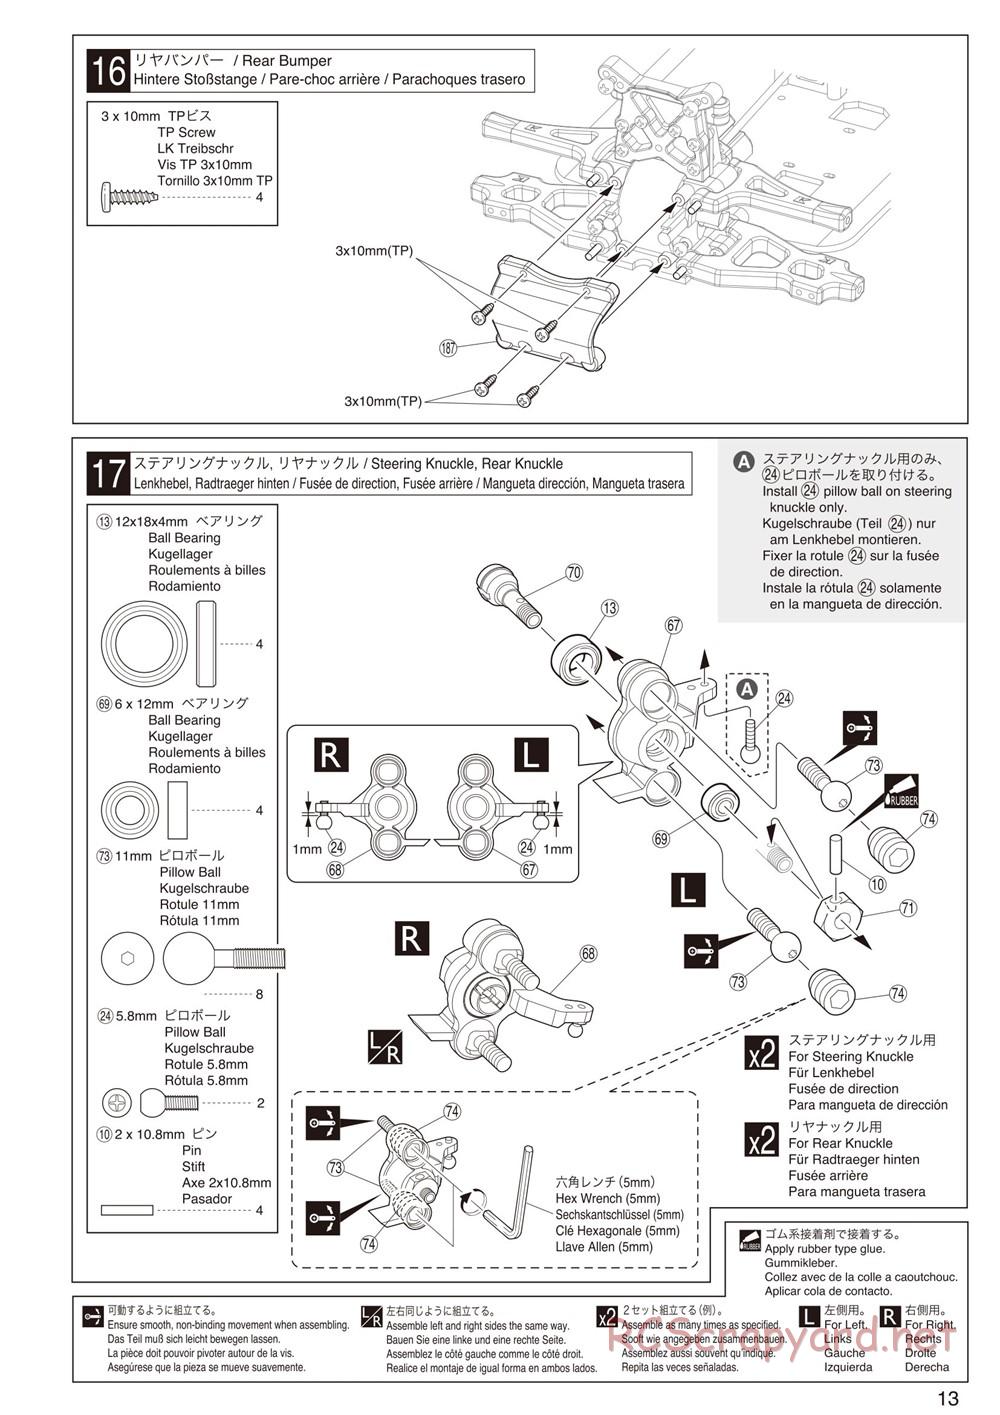 Kyosho - DRX - Manual - Page 13